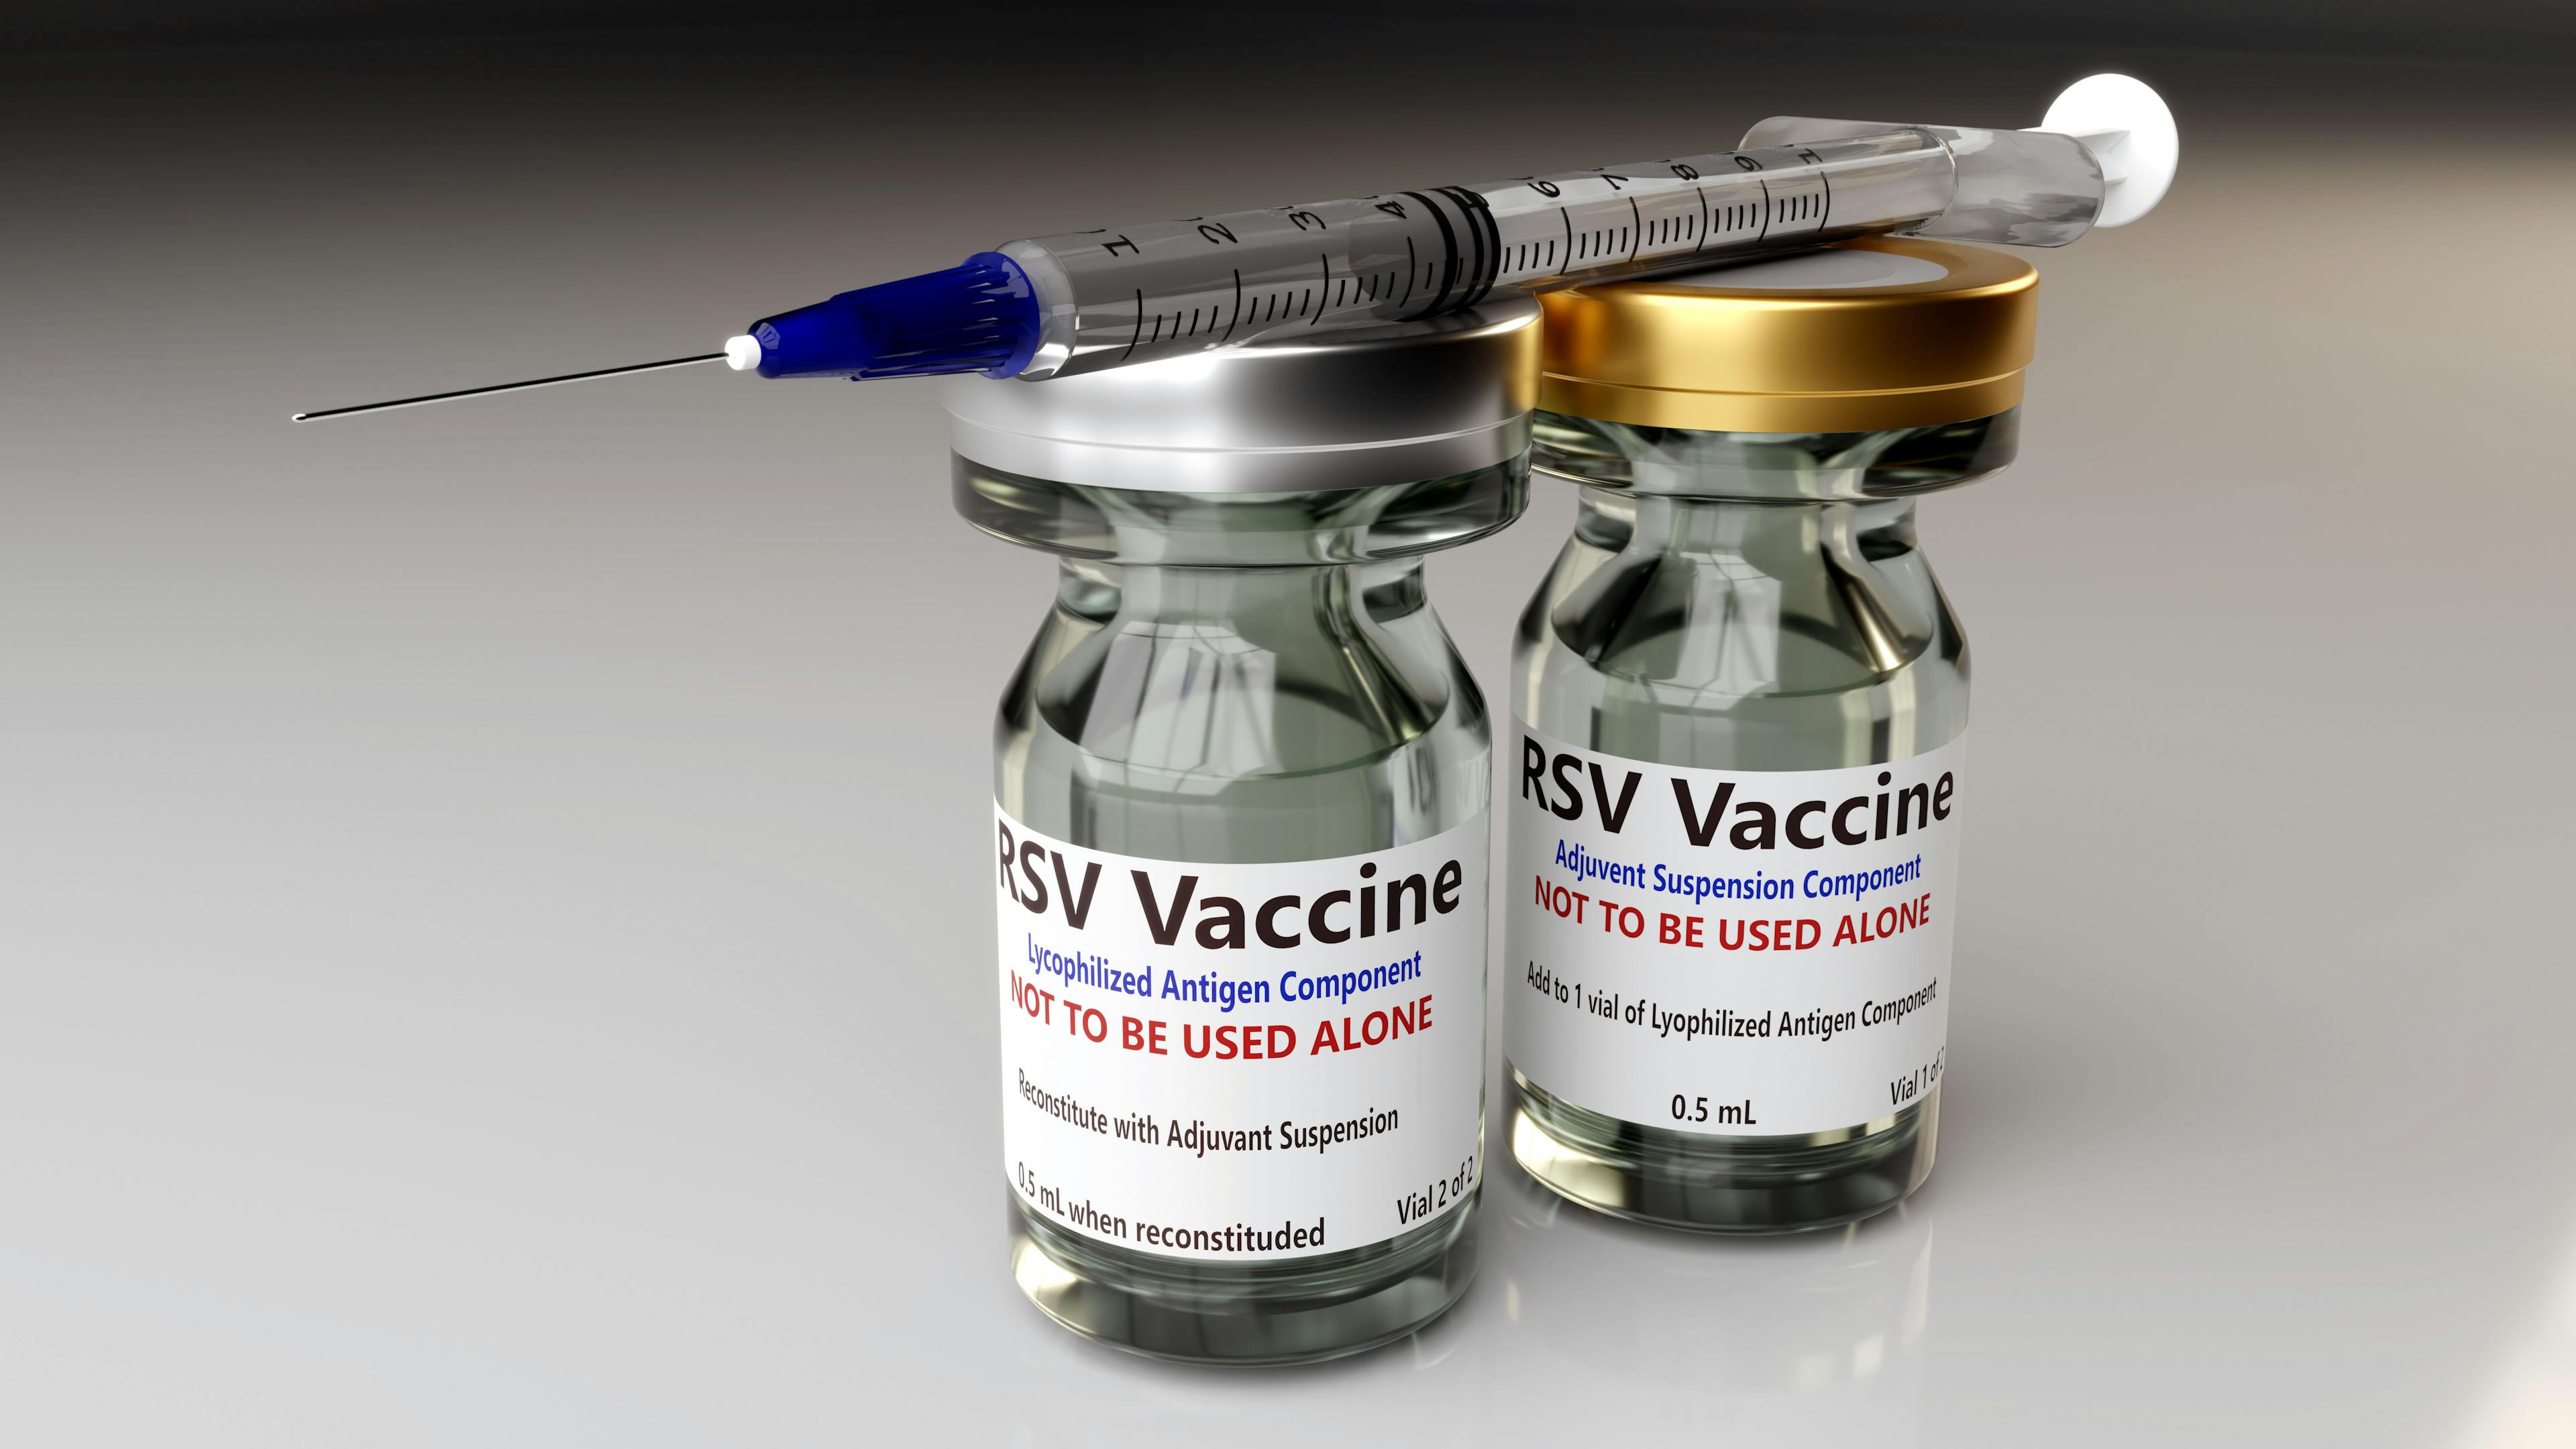 Vaccine vials used for Respiratory Syncytial Virus (RSV) with a syringe- Image credit: Peter Hansen | stock.adobe.com 